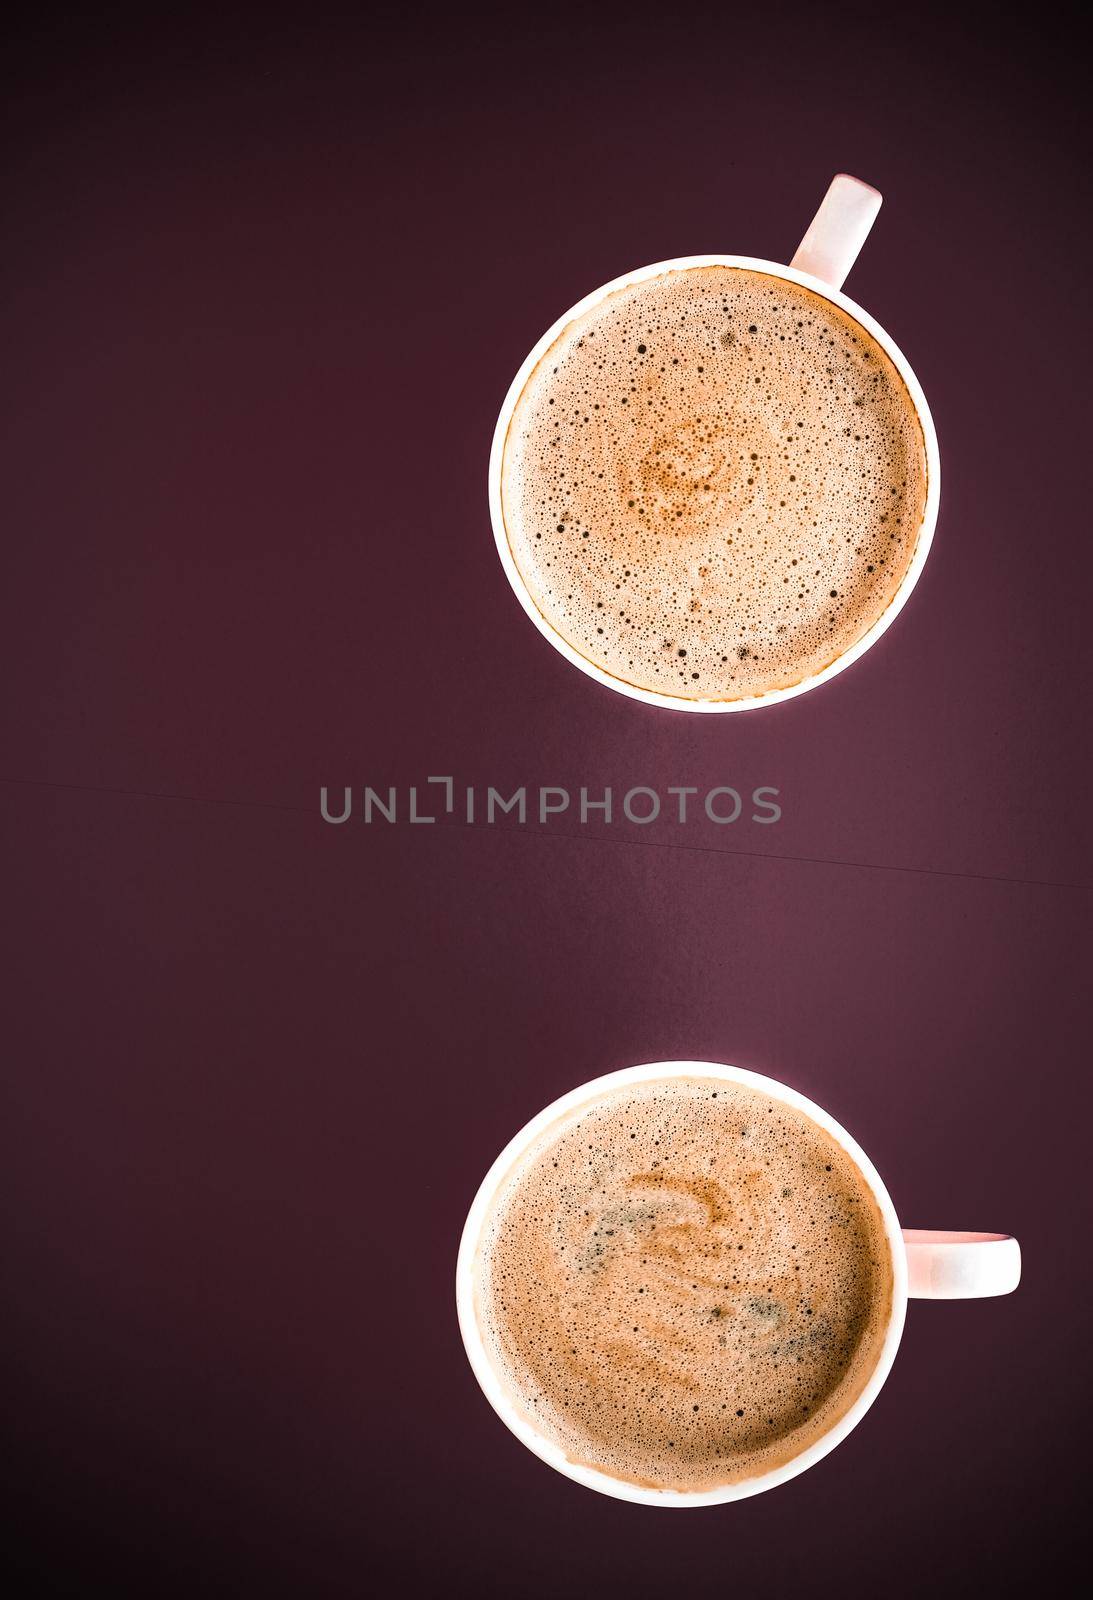 Hot drink, breakfast and vintage style concept - Coffee in the morning, flatlay background with copyspace